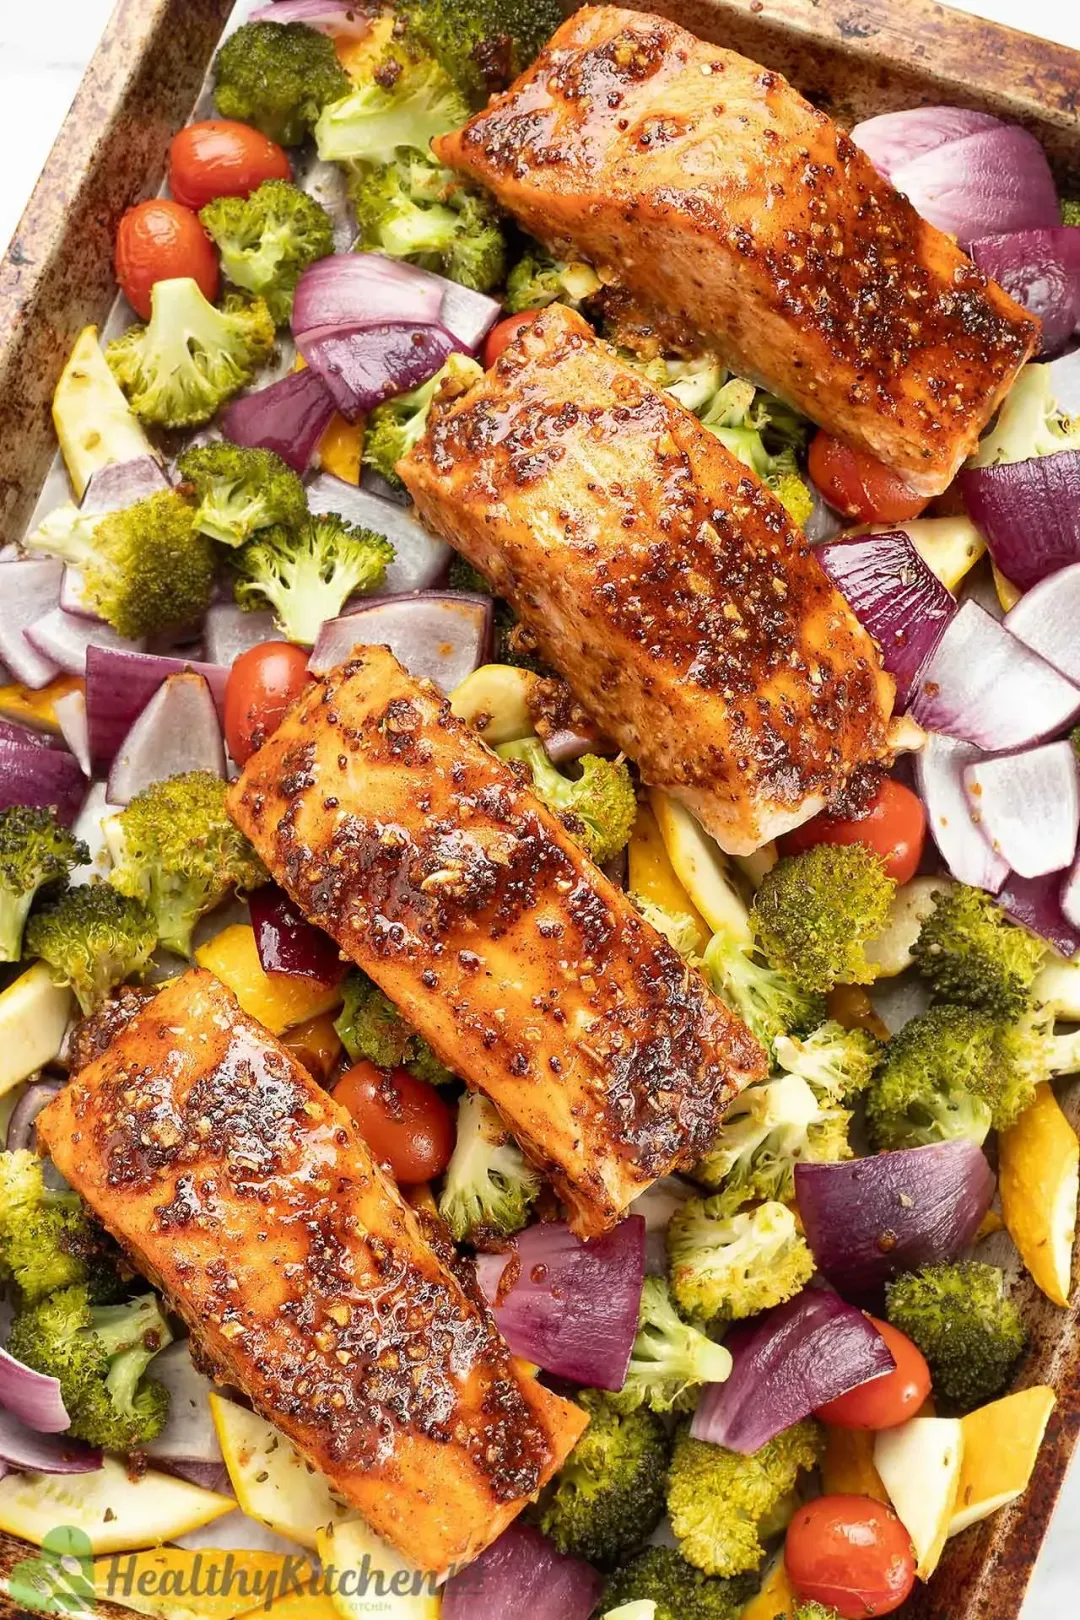 A sheer pan containing colorful broccoli florets, red onion pieces, yellow zucchini pieces, cherry tomatoes, and salmon fillets covered in a glossy brown sauce